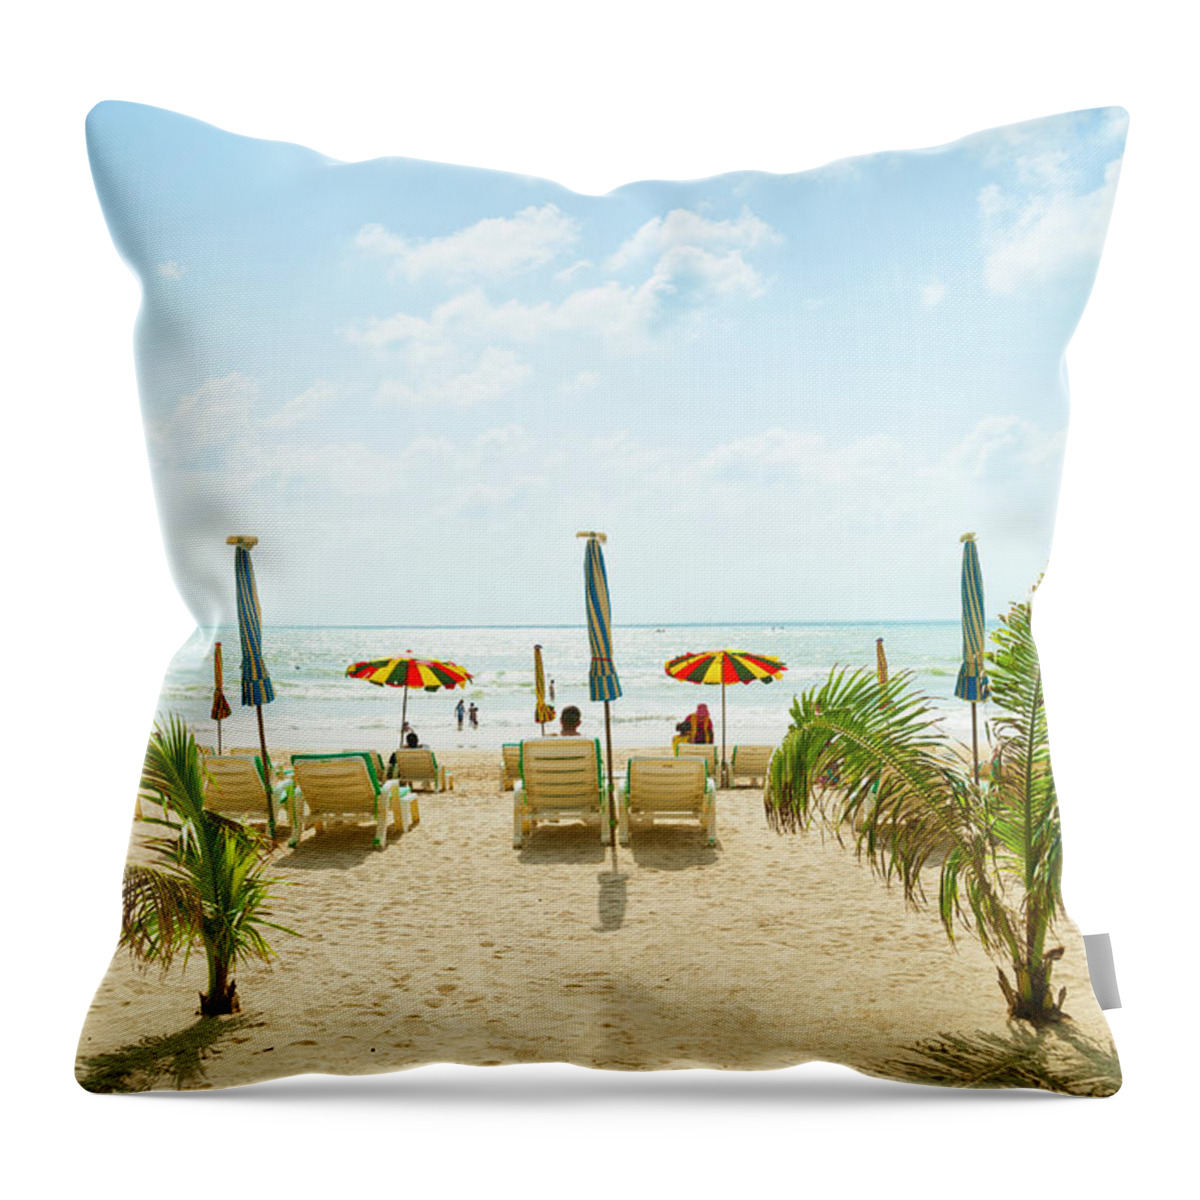 Tranquility Throw Pillow featuring the photograph Patong Beach, Phuket, Thailand #1 by John Harper